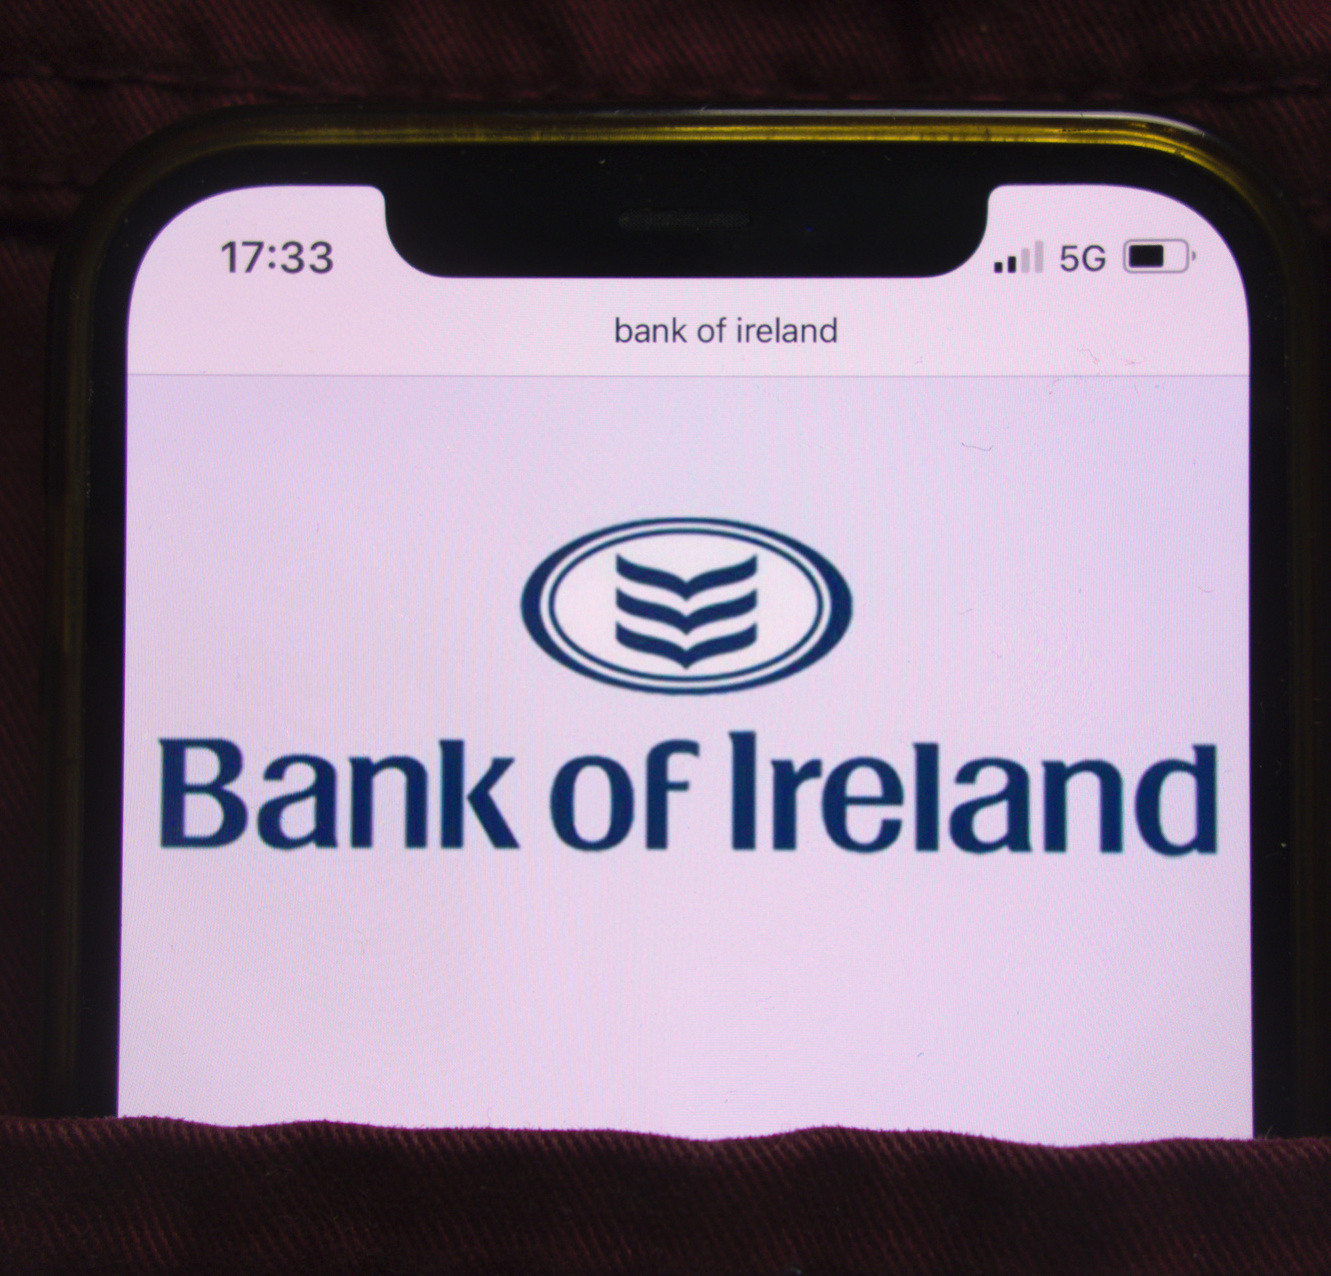 Bank of Ireland's logo on a phone screen; our Conveyancing Solicitors can help with your Bank of ireland mortgage for your property purchase, as solicitors on Bank of ireland's lender panel.